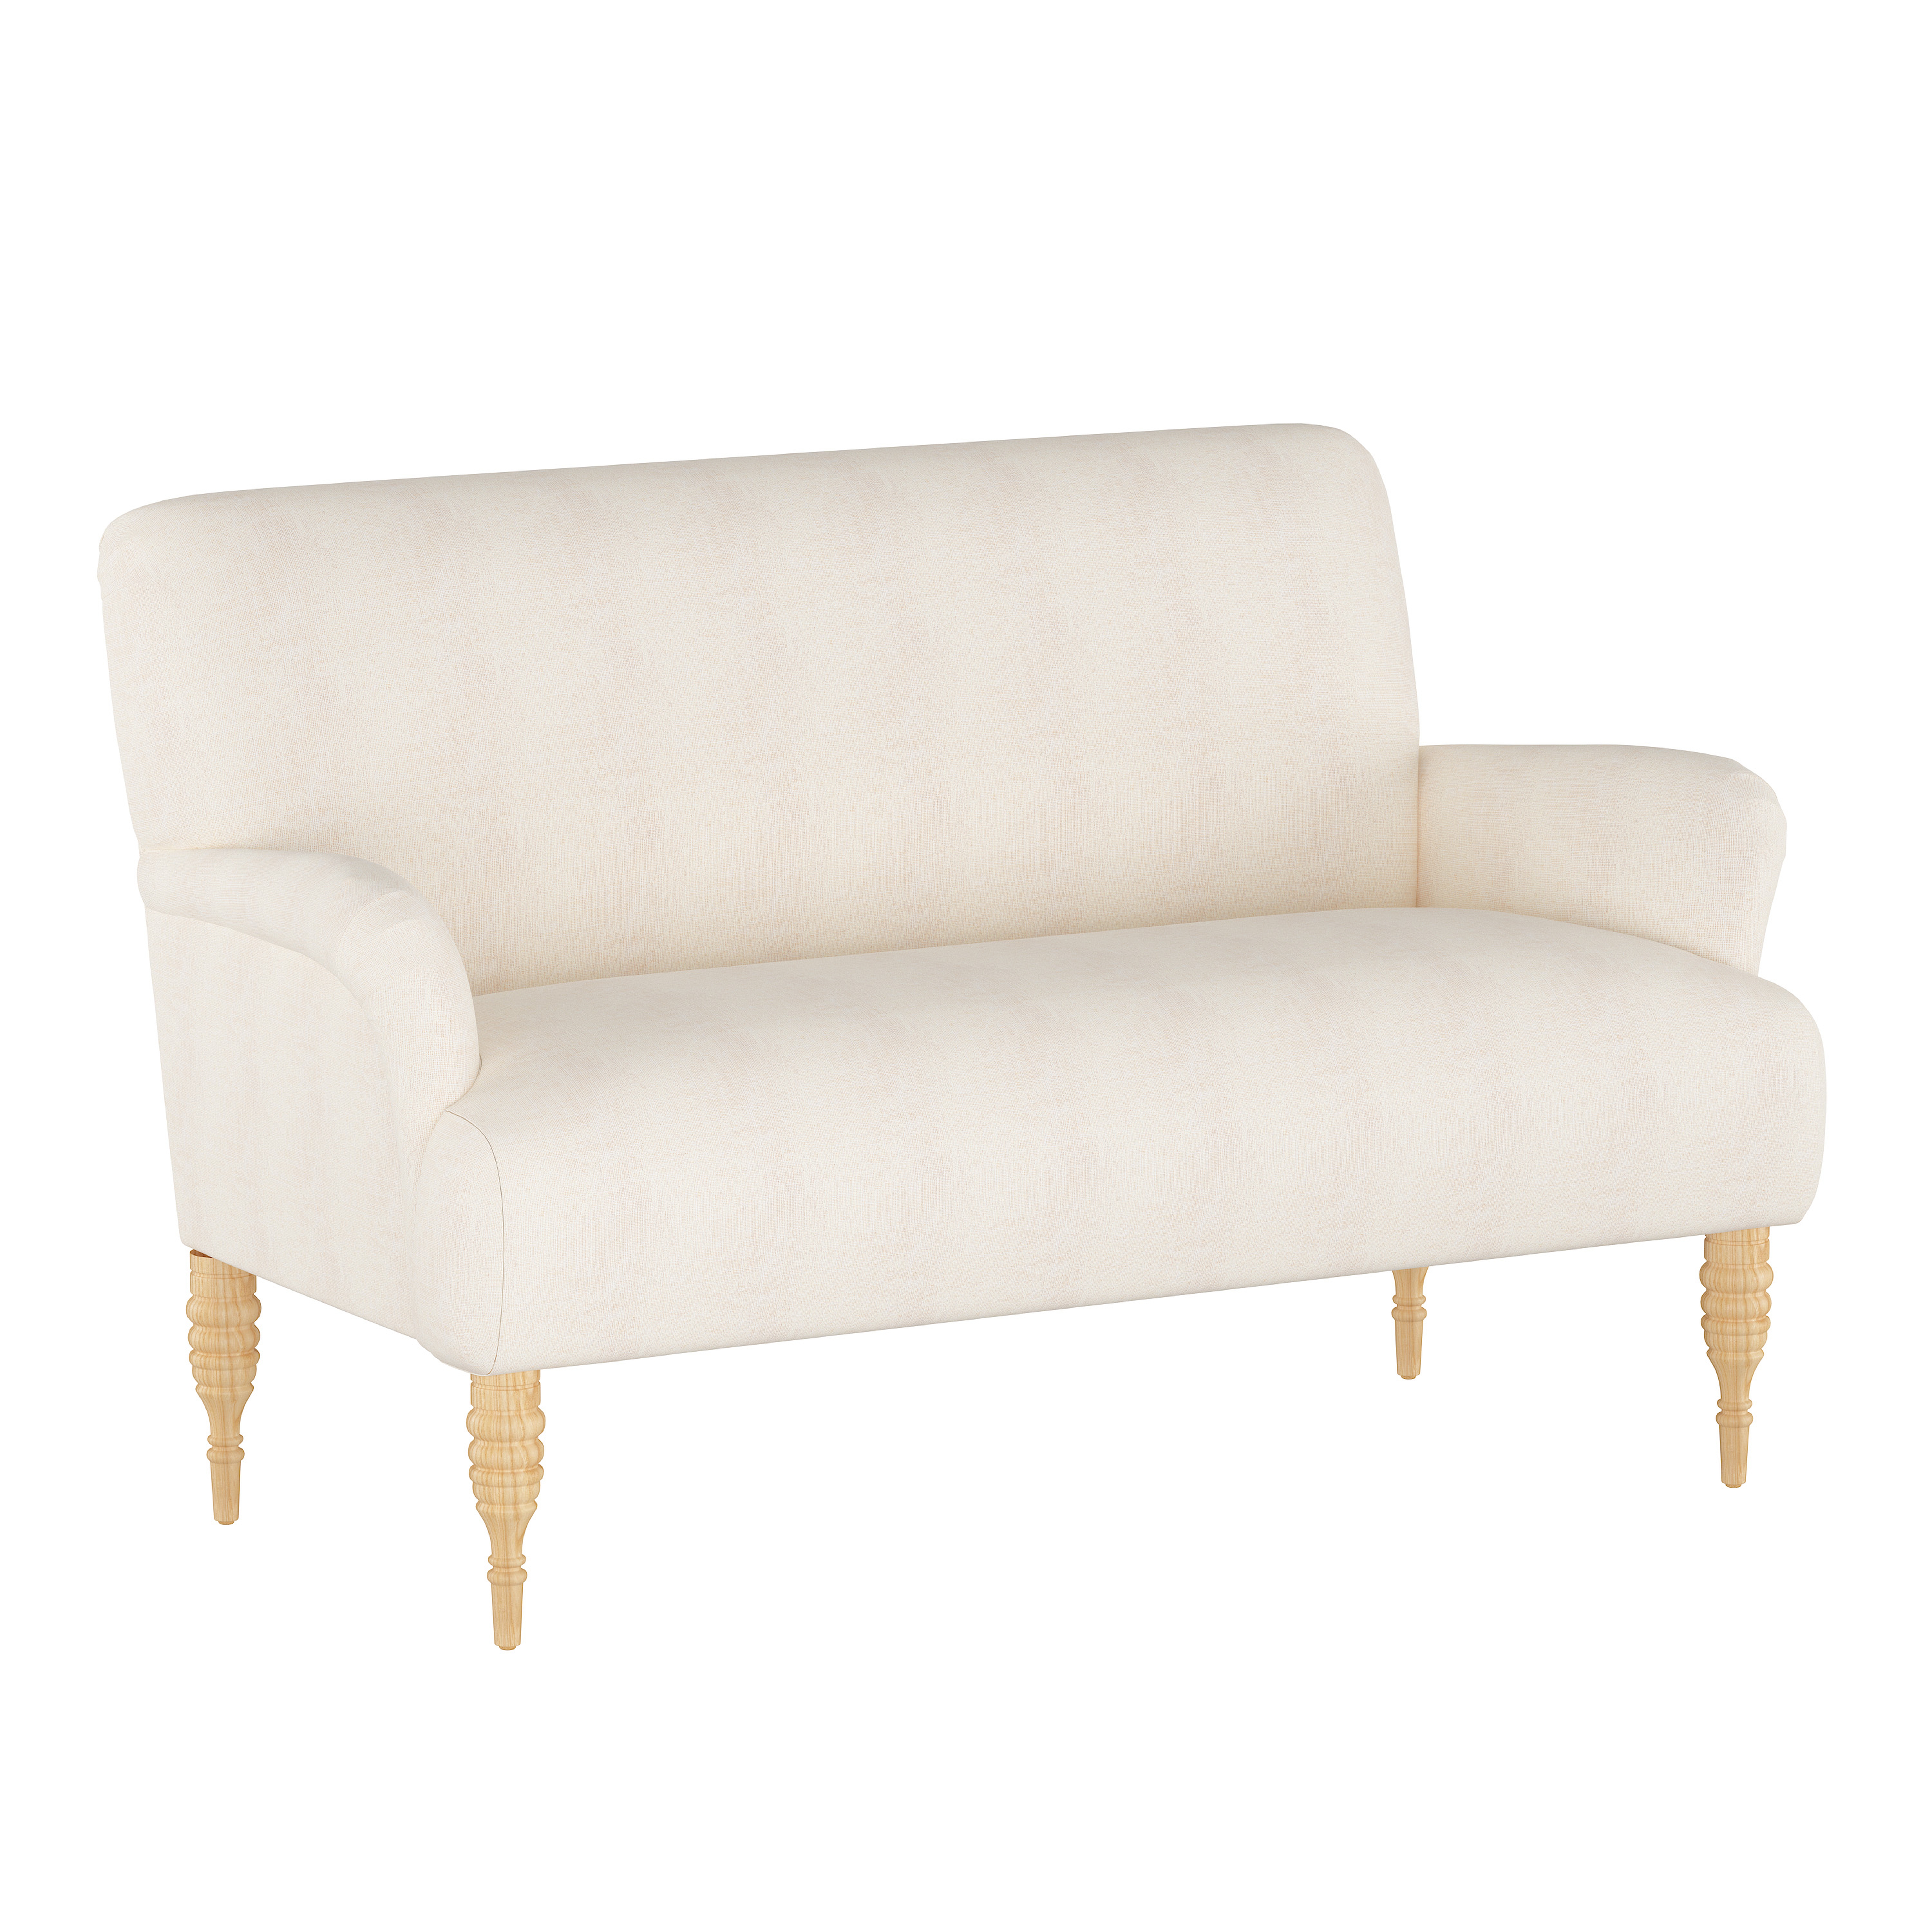 Clermont Settee, White - Cove Goods